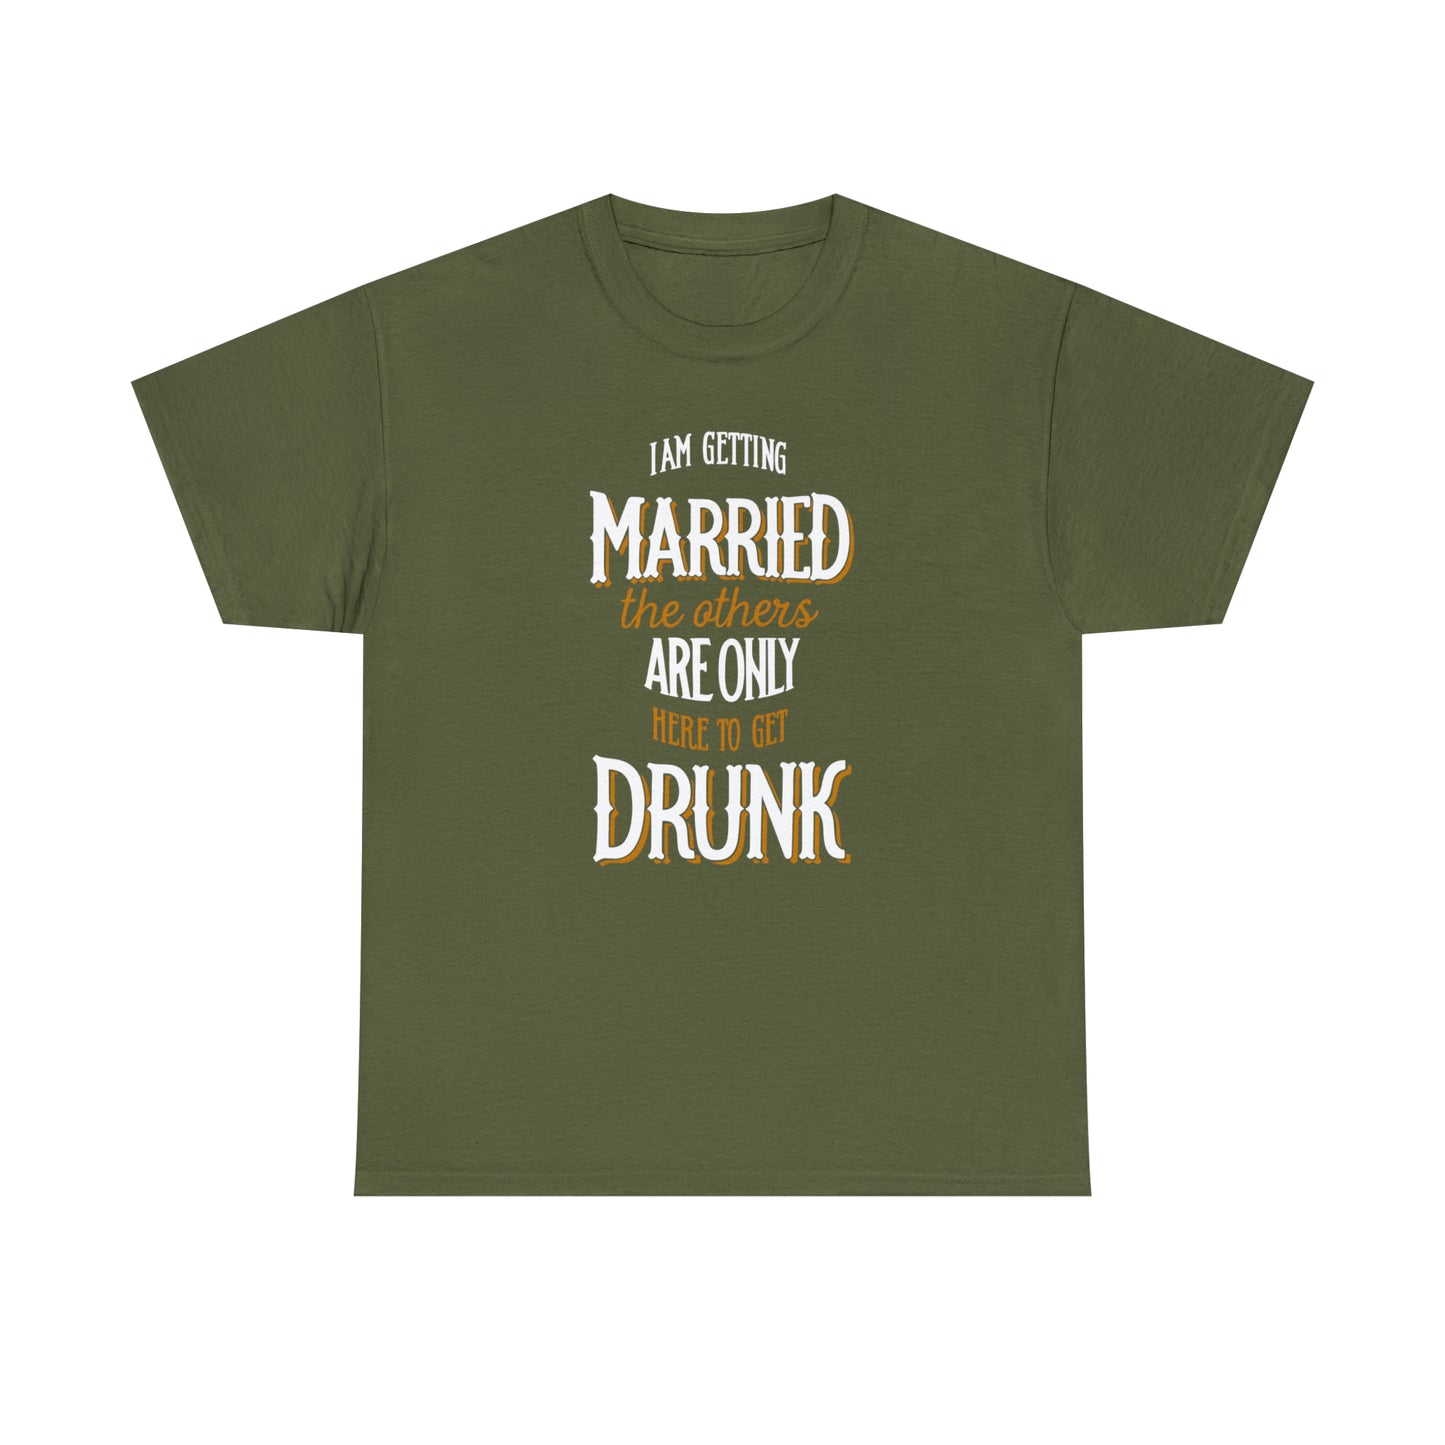 Bachelor Party T-Shirt For Getting Married TShirt For Groom T Shirt